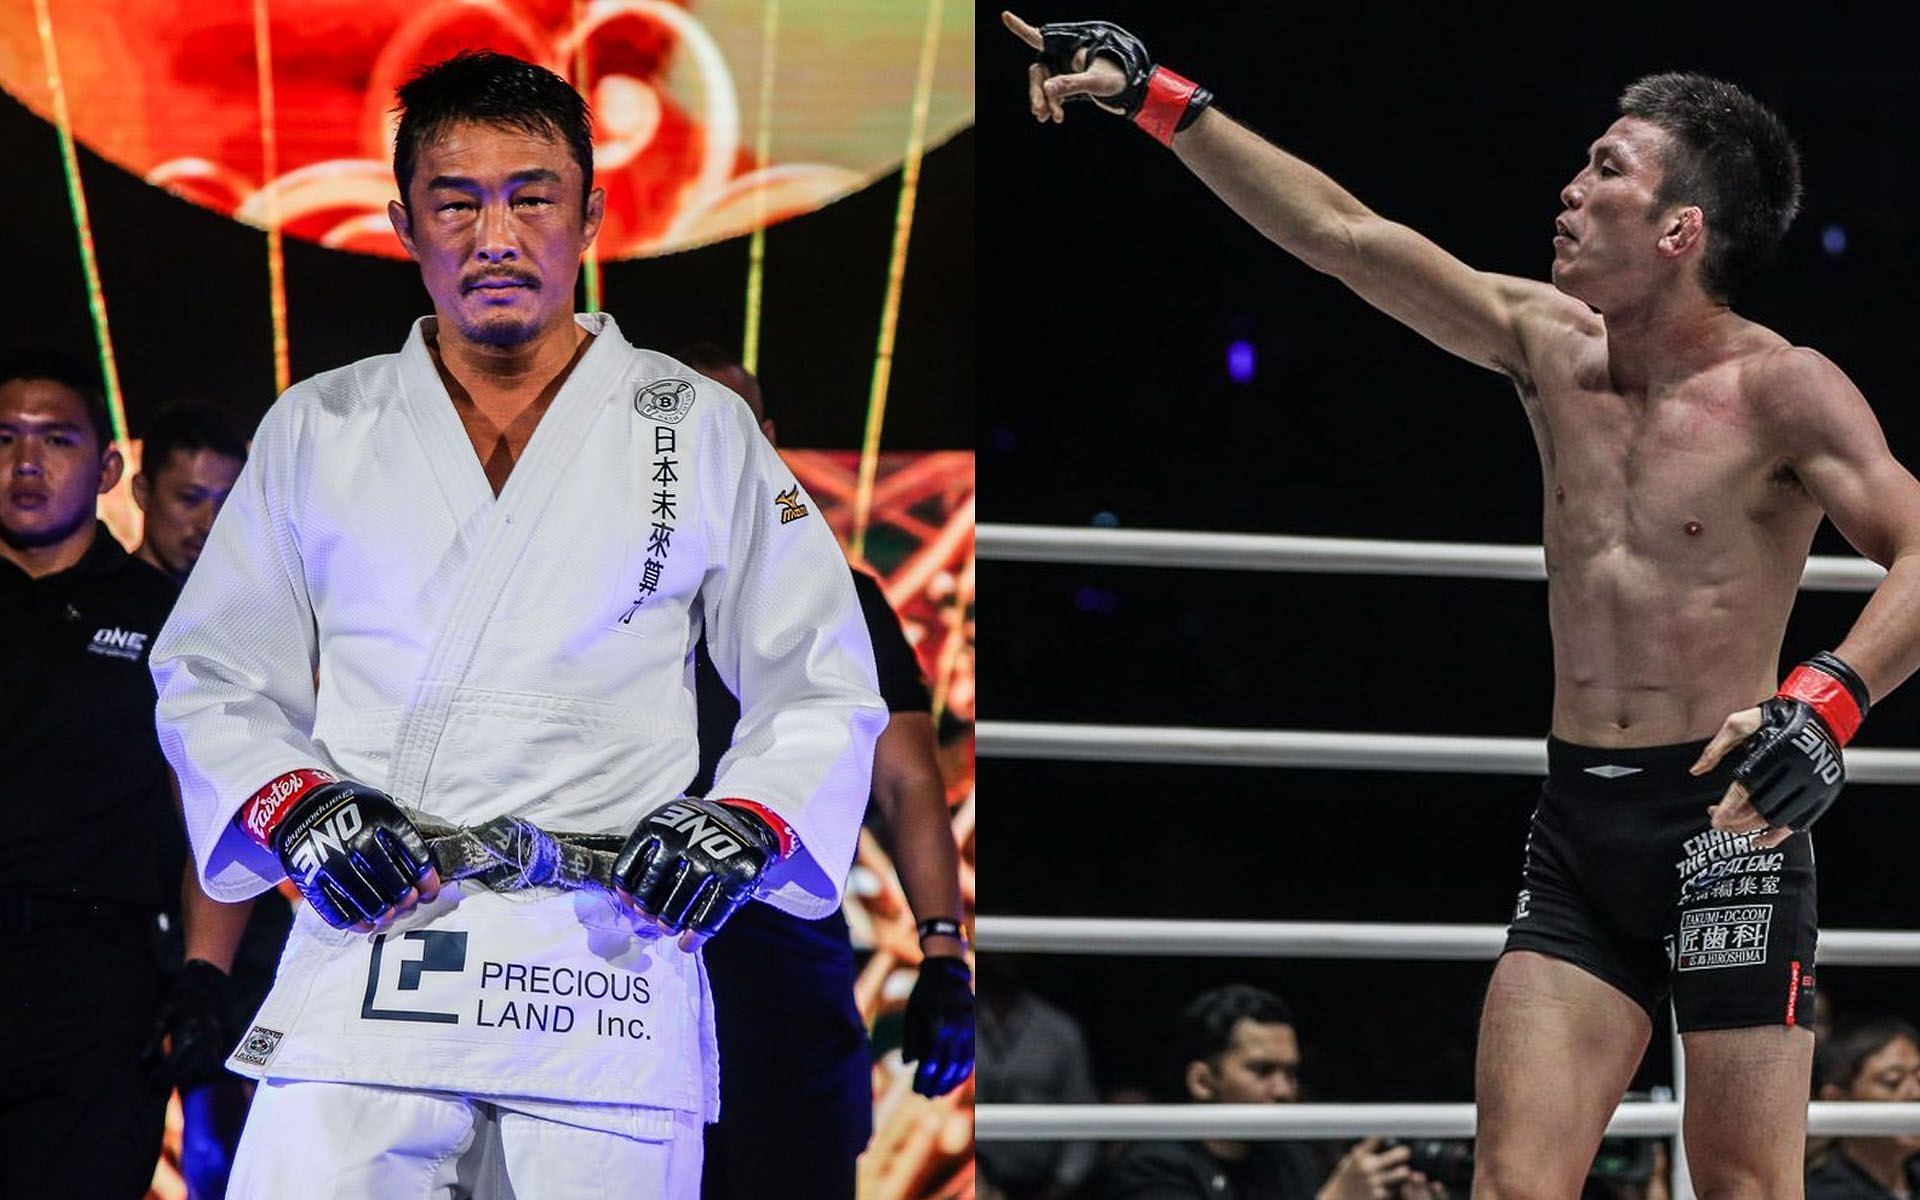 Will we see Yoshihiro Akiyama (Left) and Shinya Aoki (Right) opposite each other in the Circle soon? | [Photos: ONE Championship]